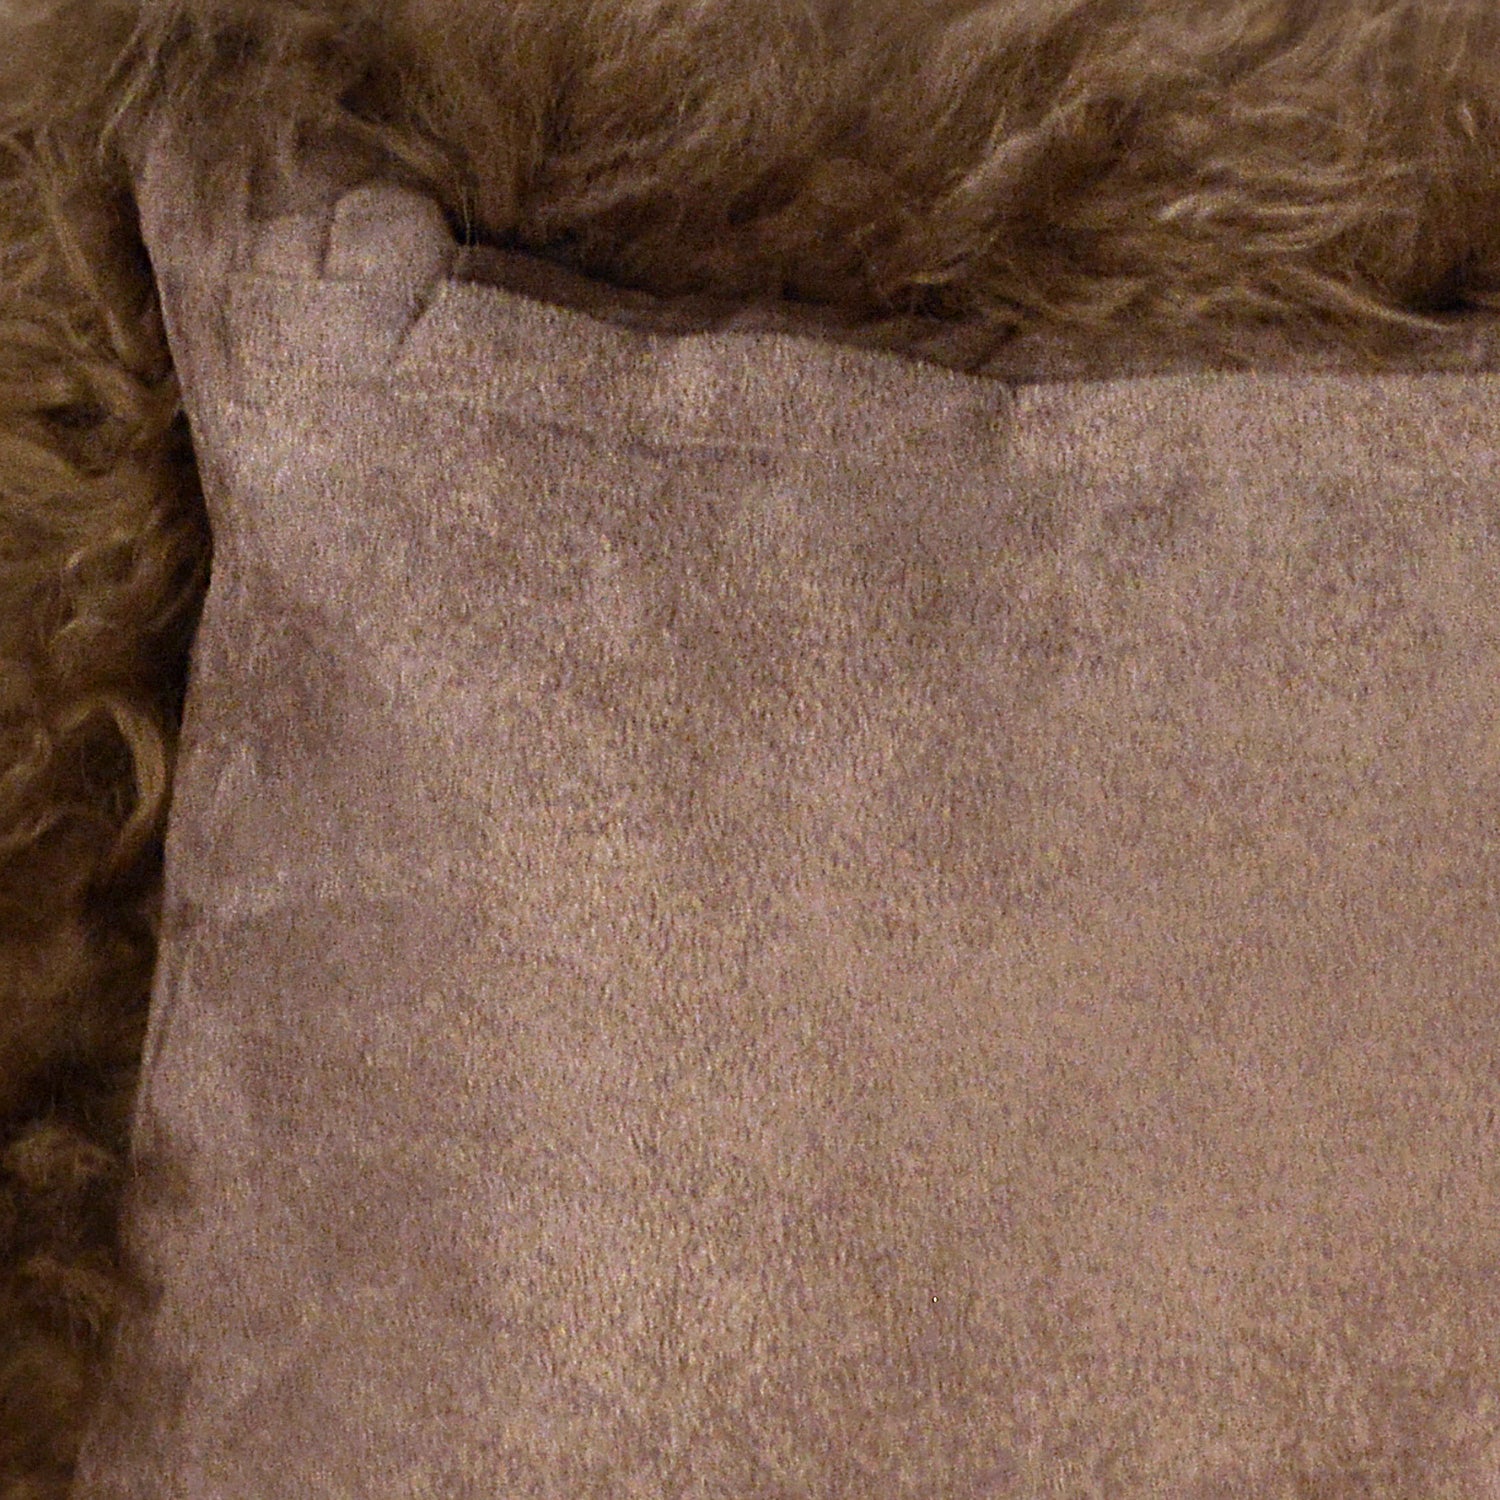 With its unrivaled softness and luxurious lamb fur, this 35x12" pillow will become an instant statement piece. Featuring a lush texture in a beautiful light brown color, completed with a smooth suede back to create the perfect material mix. Pair with other colors and sizes from the same collection.Depth : 6 in Amethyst Home provides interior design, new home construction design consulting, vintage area rugs, and lighting in the Nashville metro area.